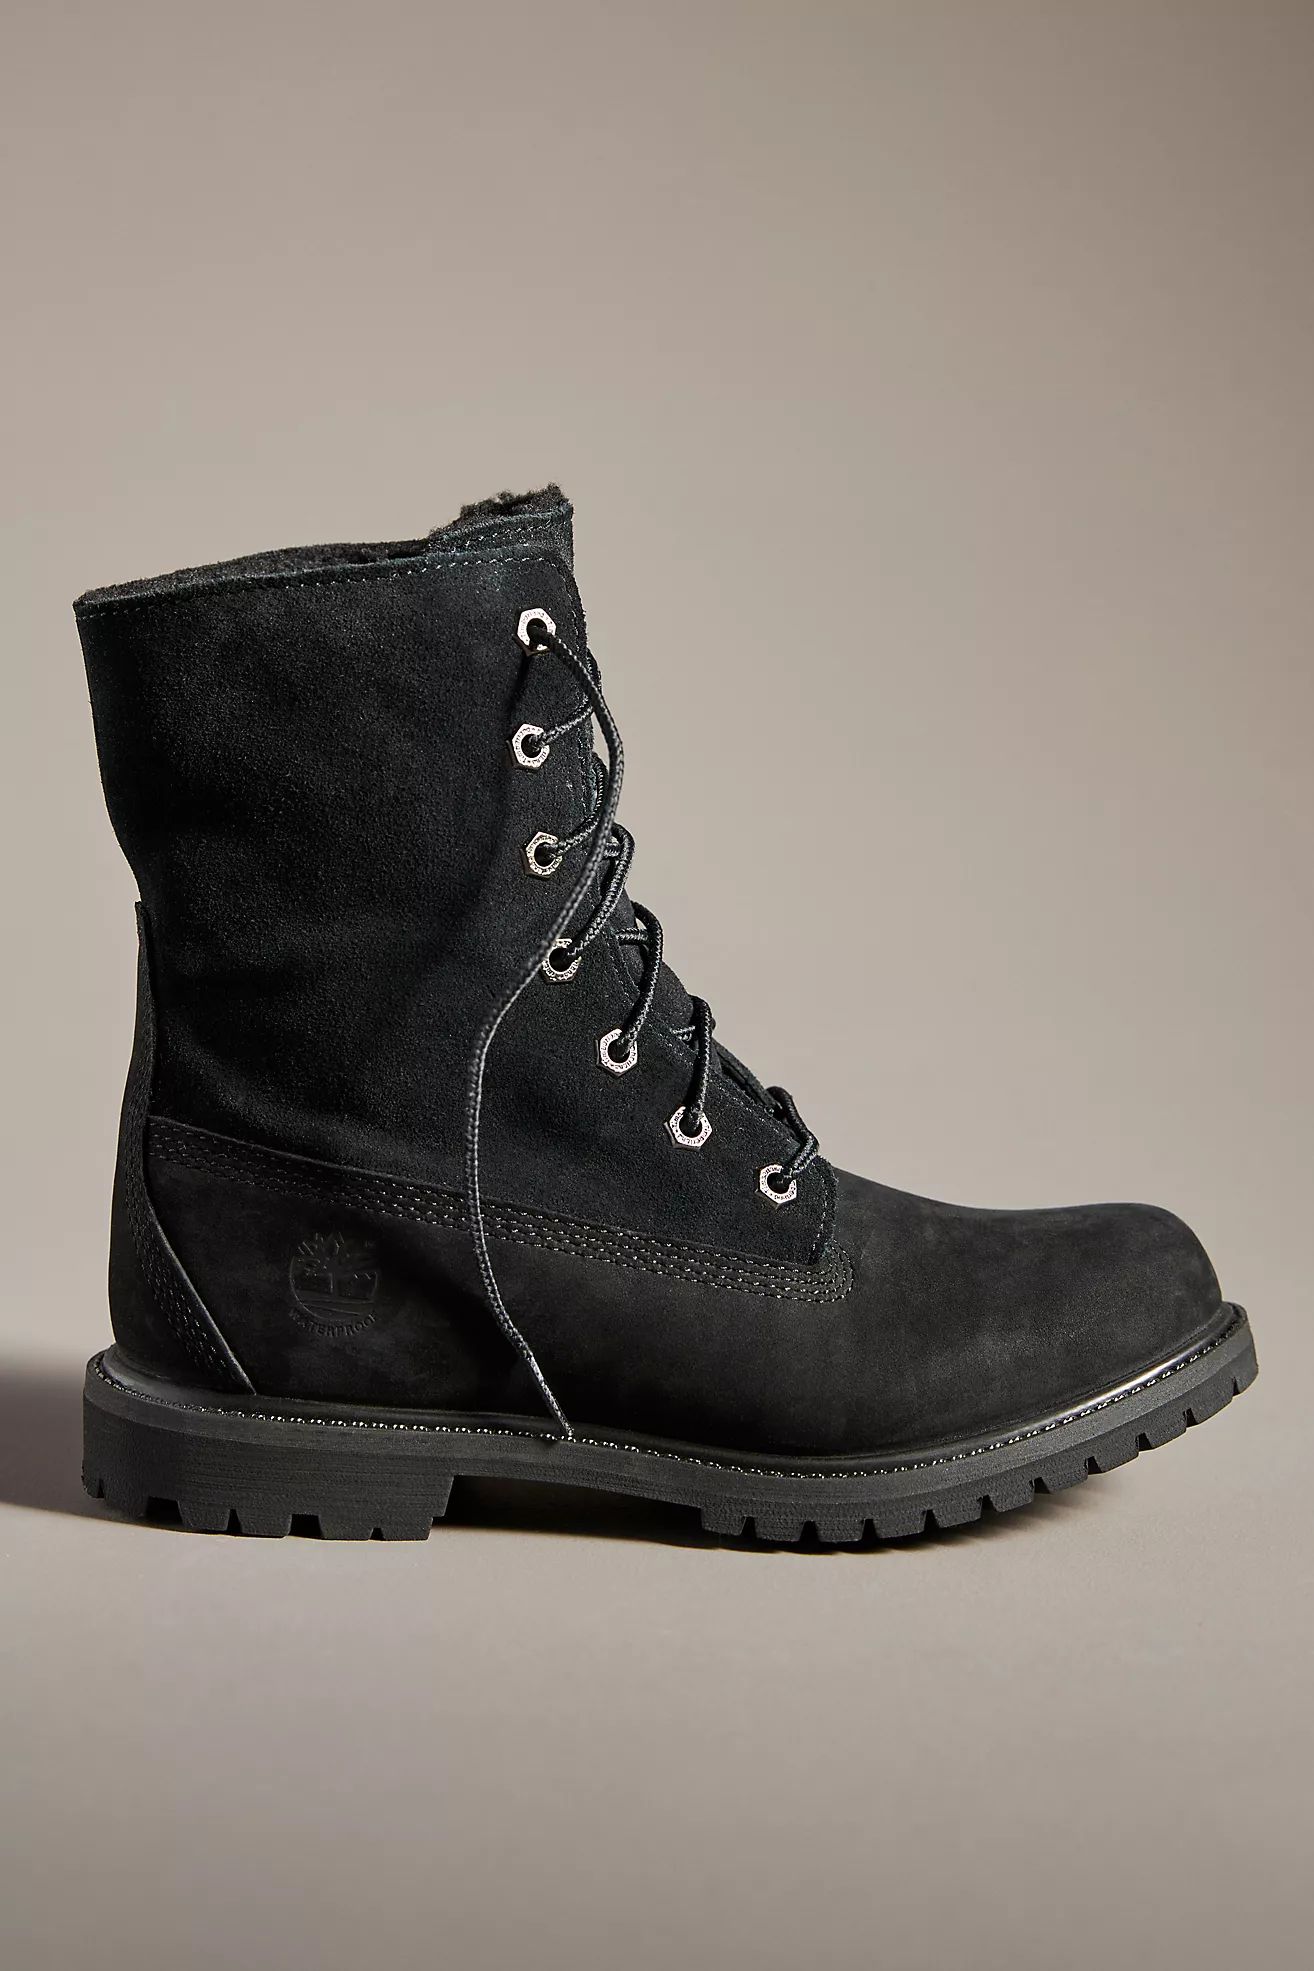 Timberland Authentics Roll-Top Boots | Anthropologie (US)